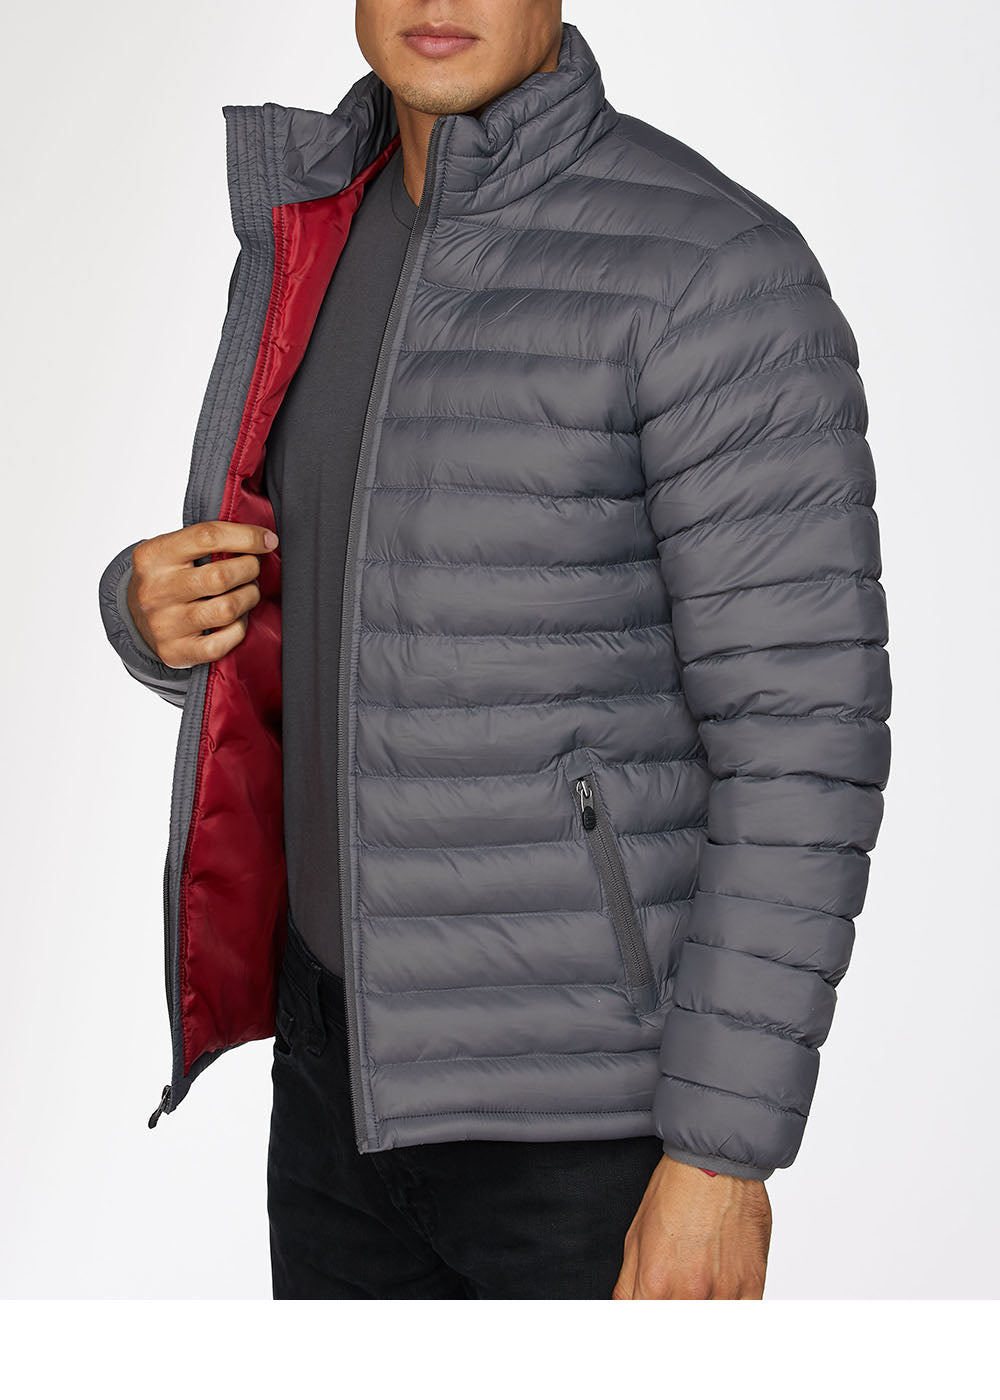 Men's Nylon Quilted Puffer Jacket -NJ640-Charcoal